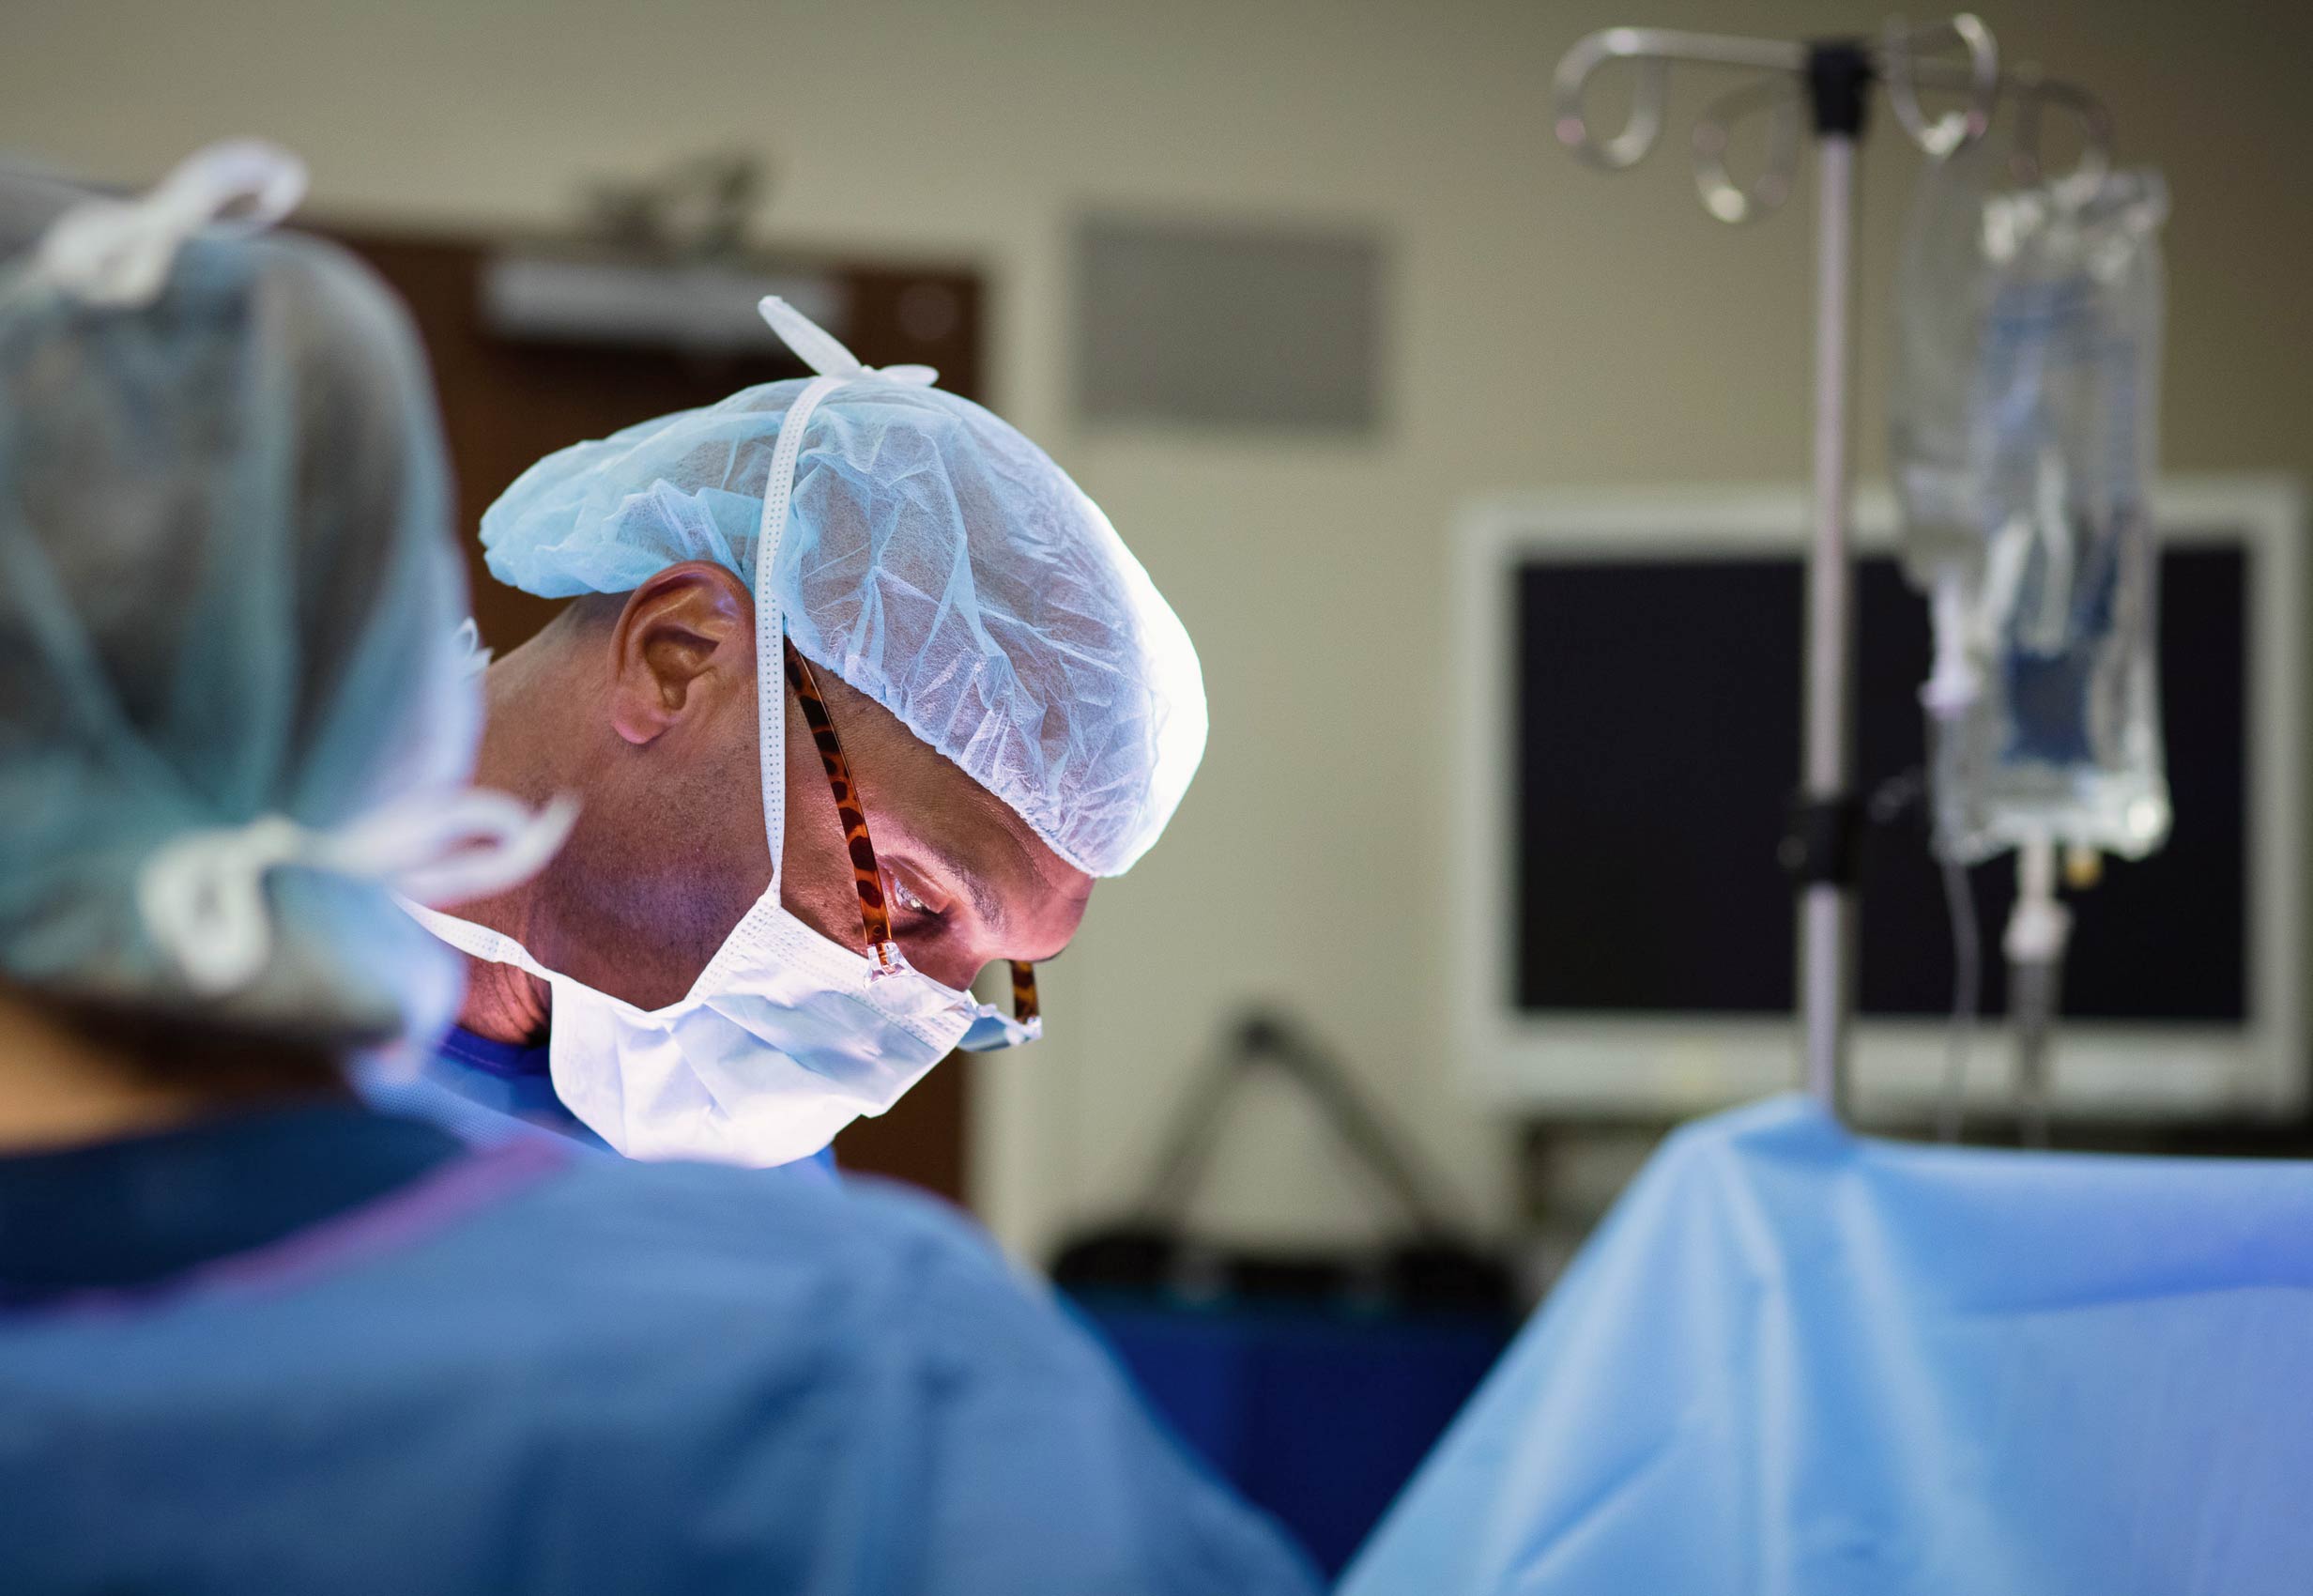 Surgeon Operates on a Patient